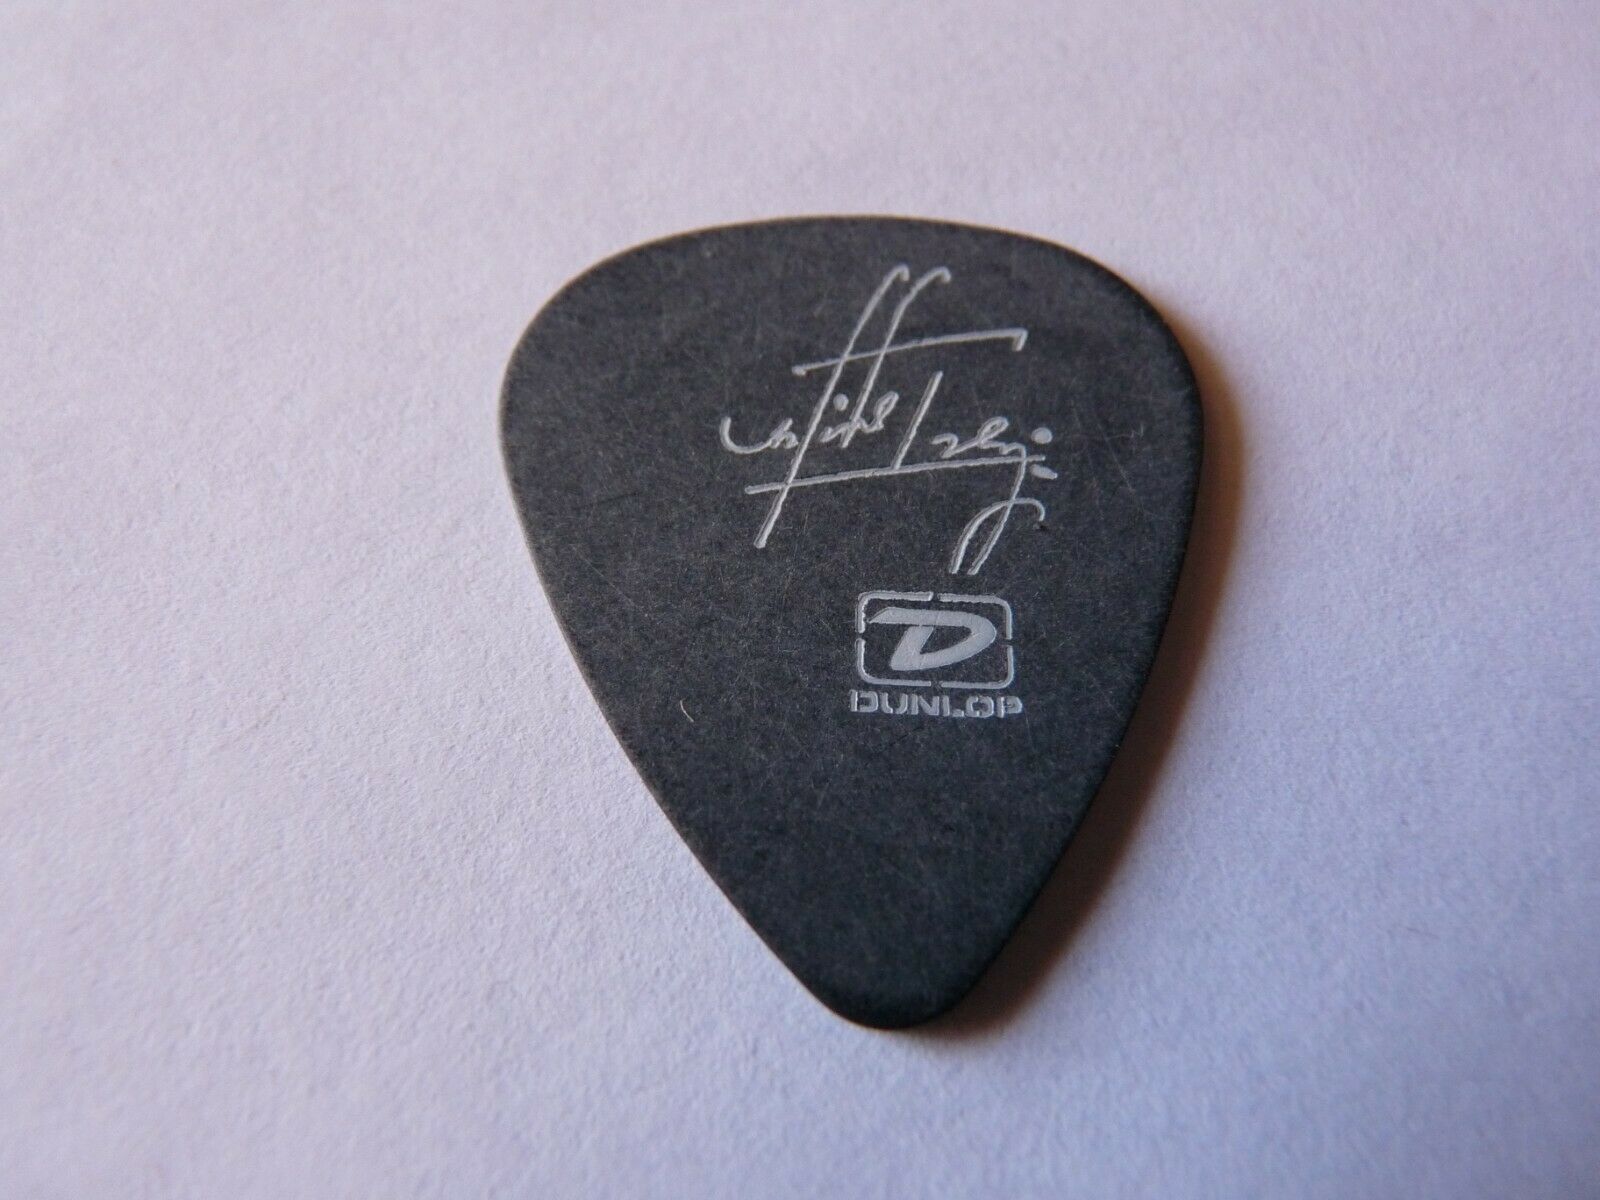 HEART OF ALICE IN CHAINS HEART VINTAGE CONCERT TOUR ISSUED GUITAR PICK COLLECTIBLE MEMORABILIA